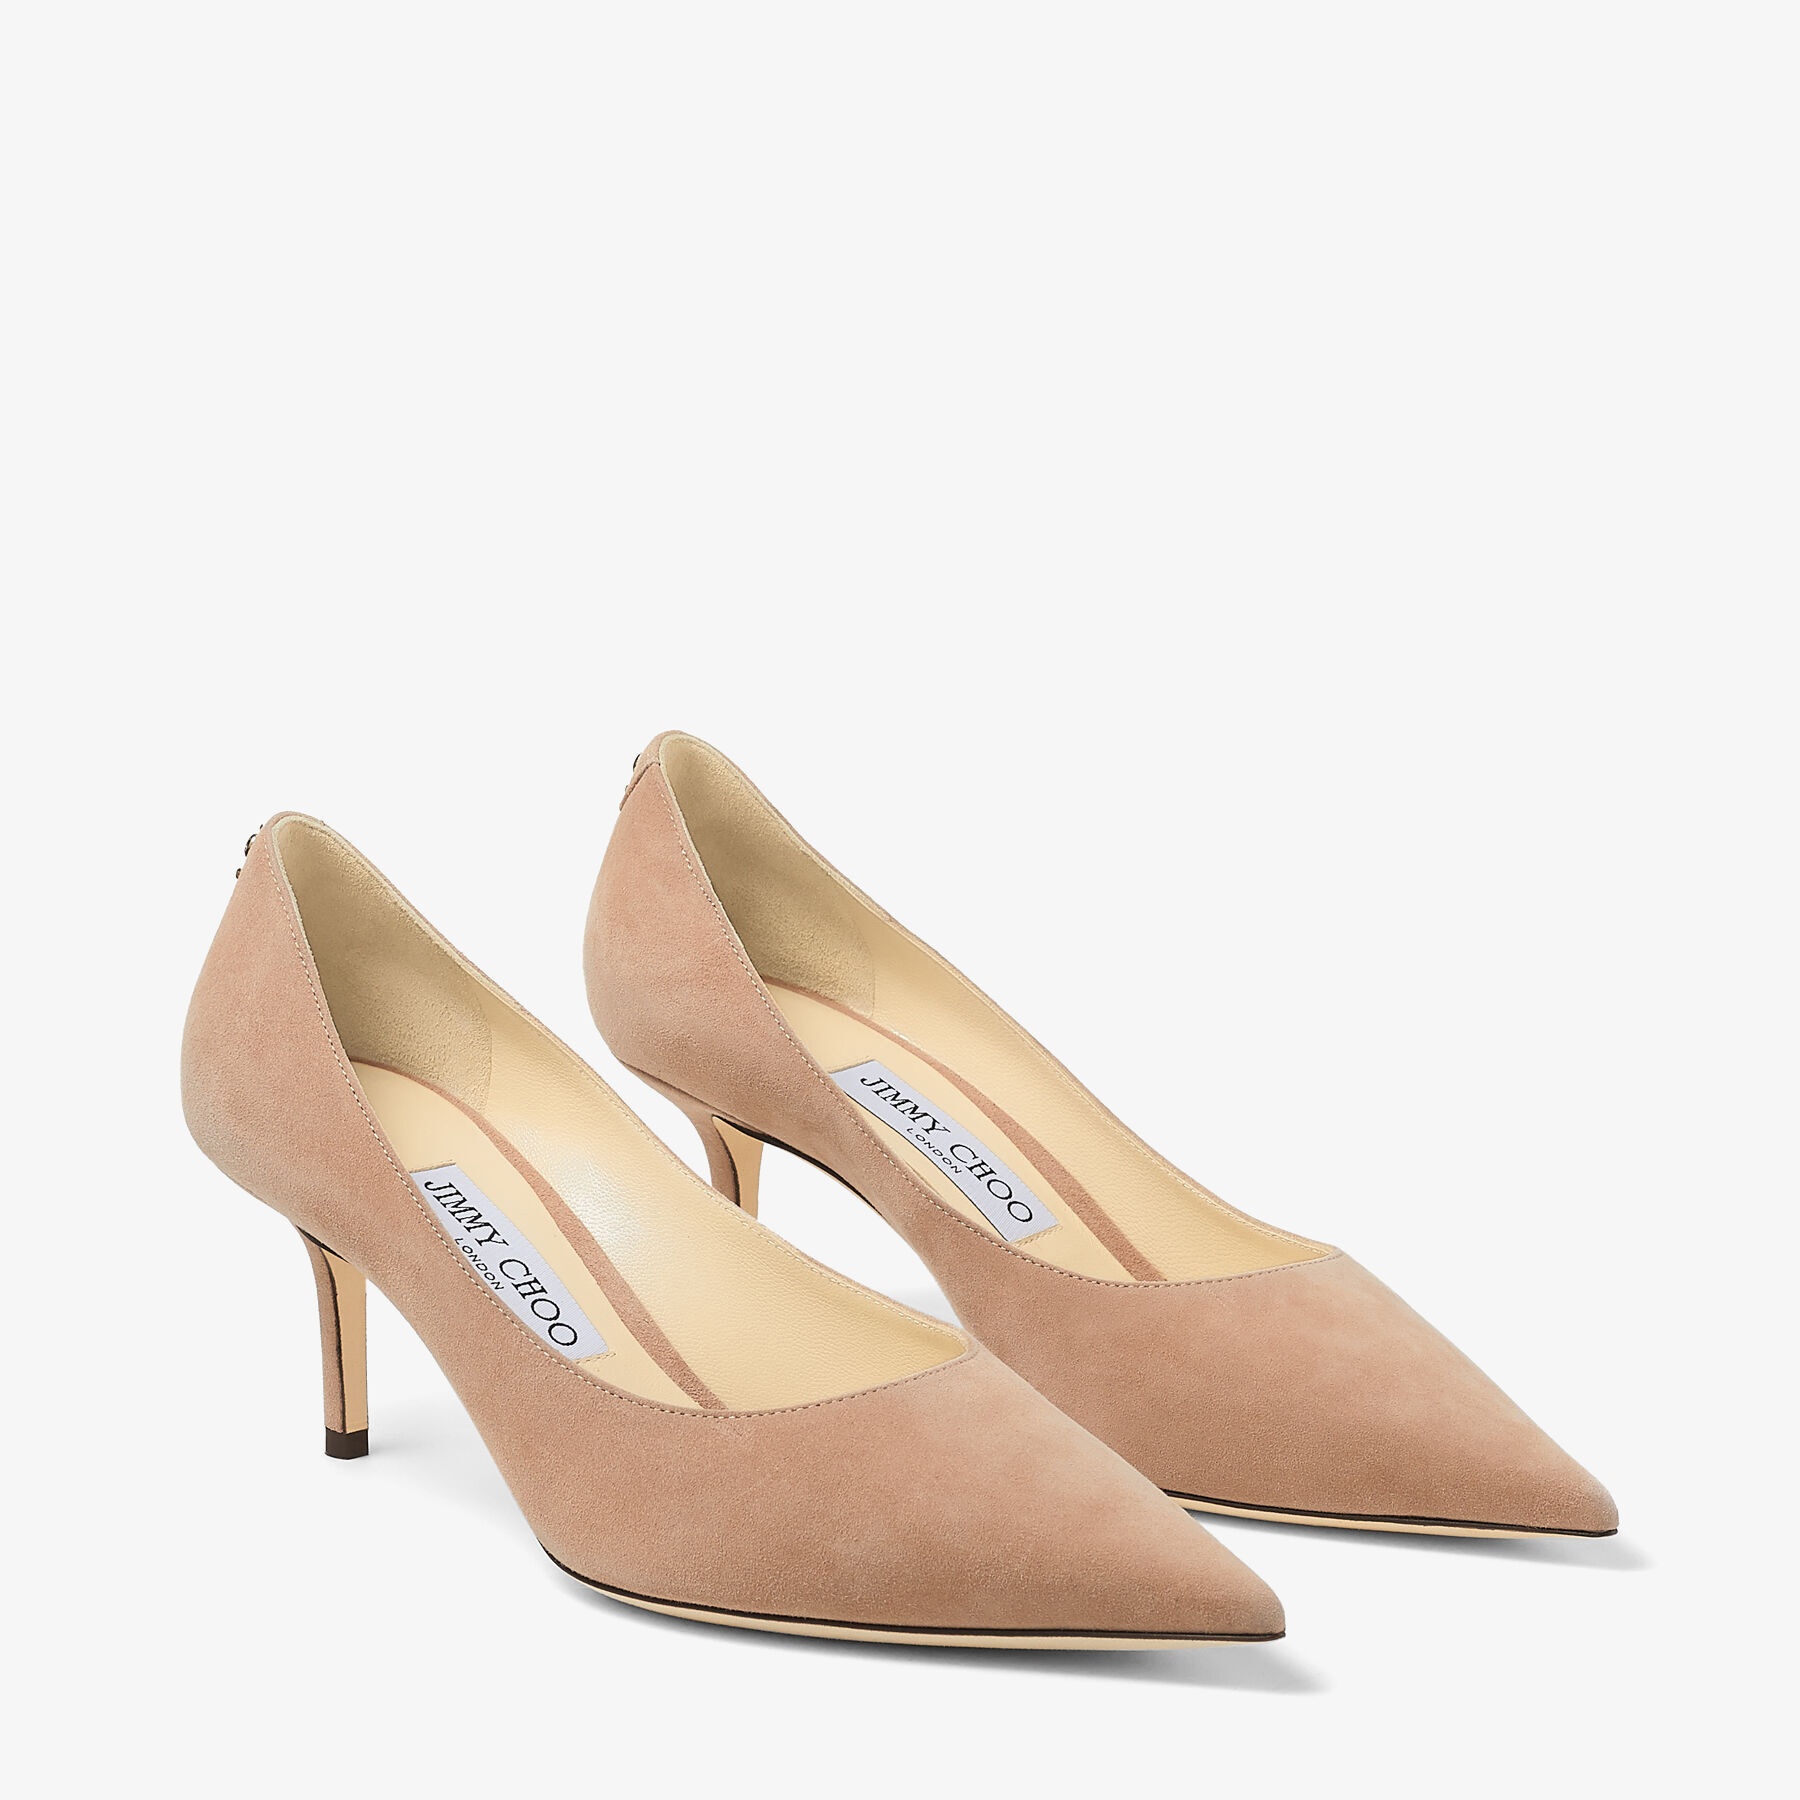 Love 65
Ballet Pink Suede Pointed Pumps with JC Emblem - 3